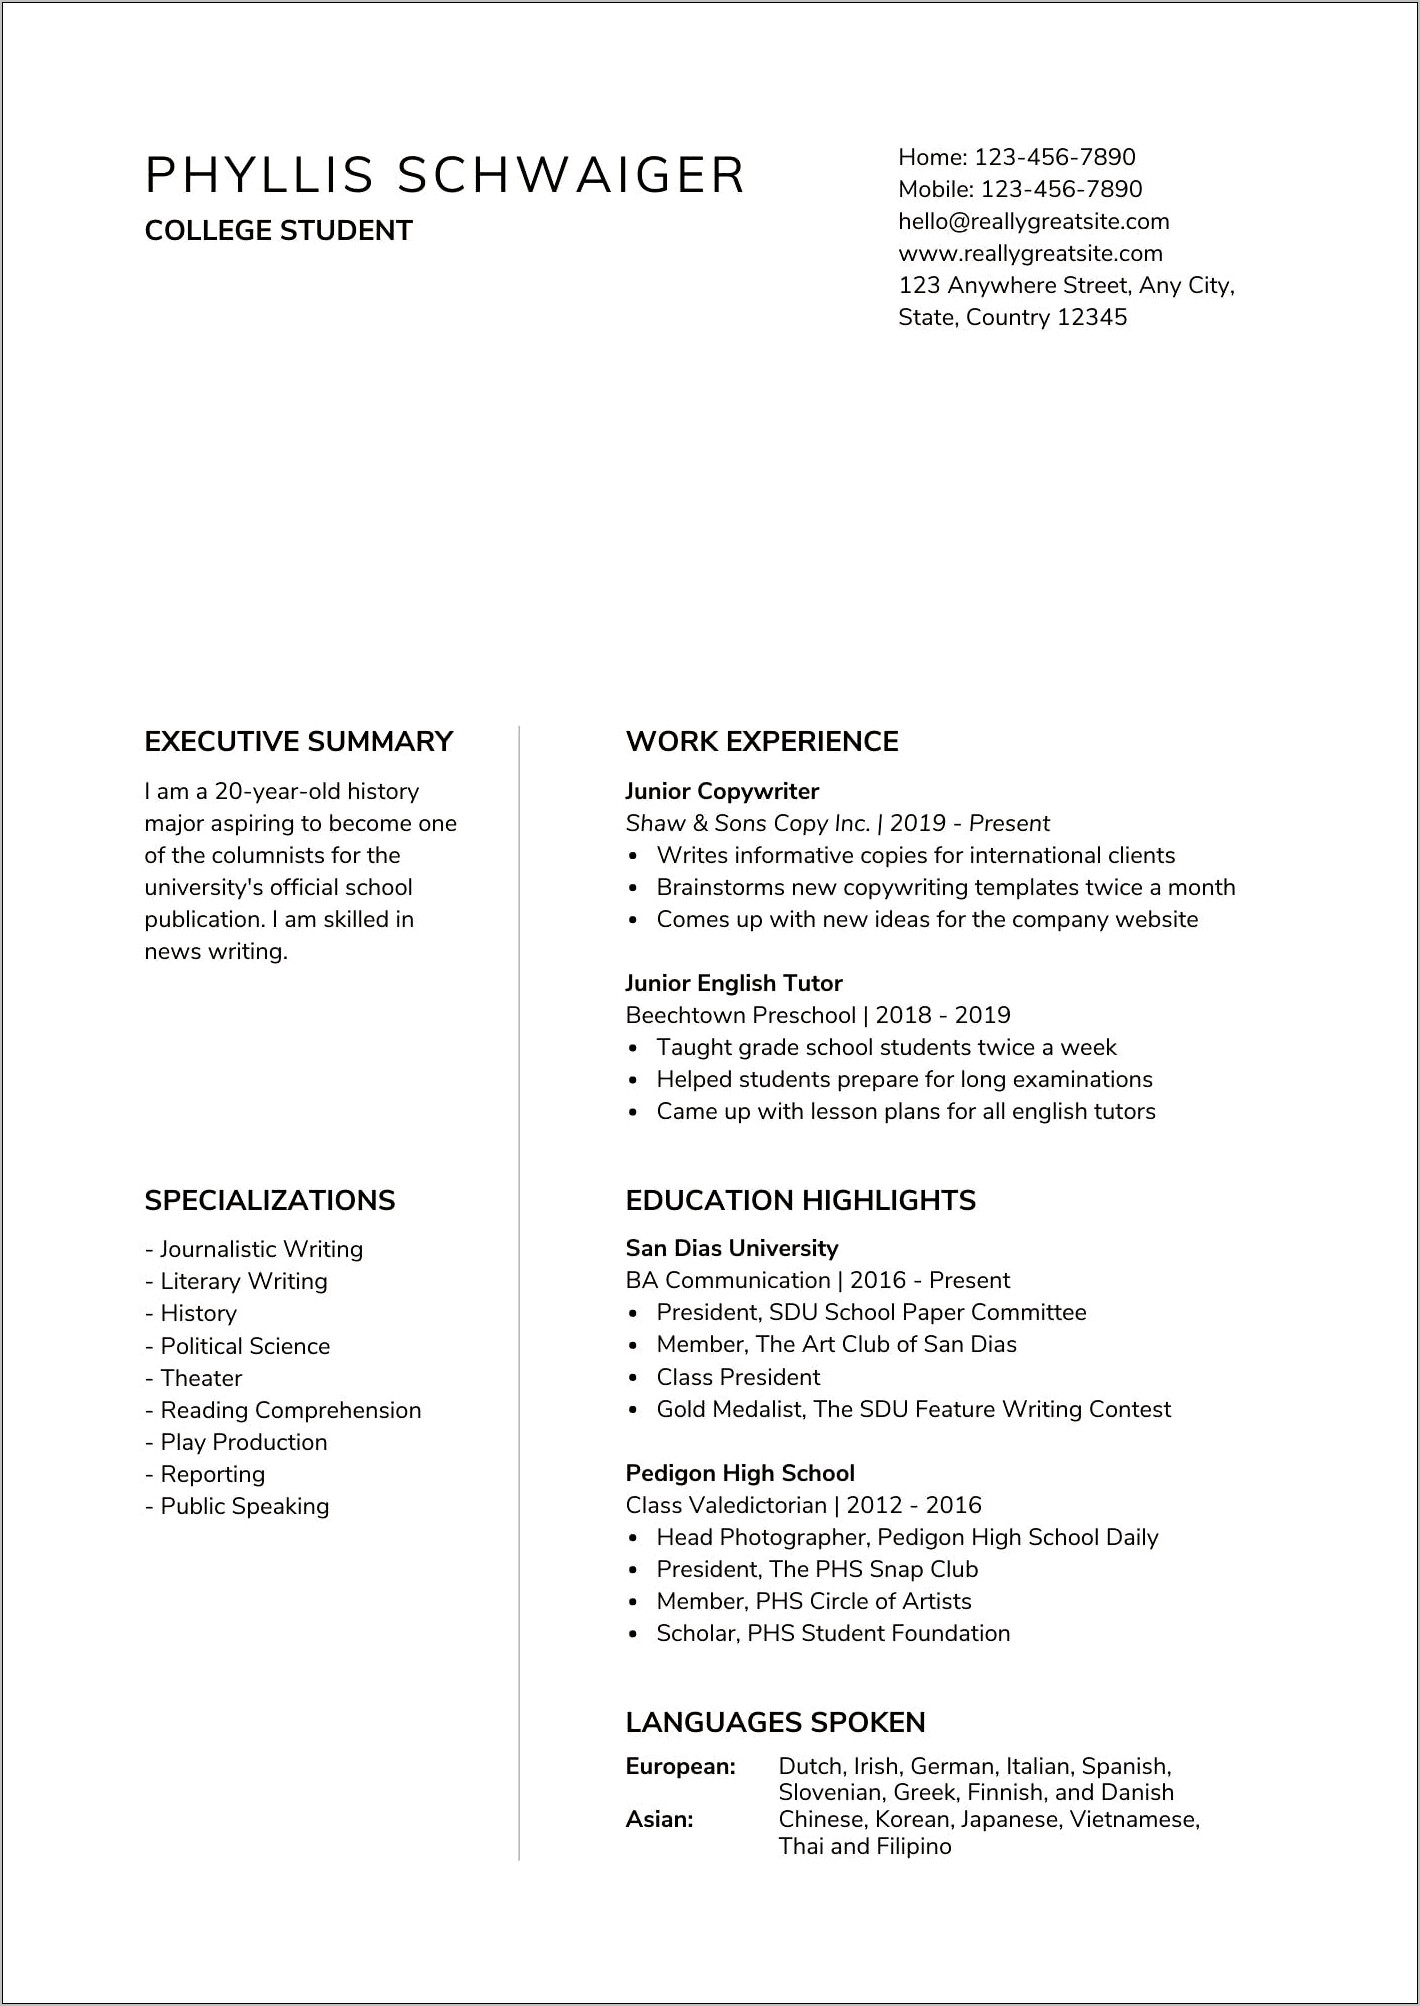 Resume For Someone Fresh Out Of School